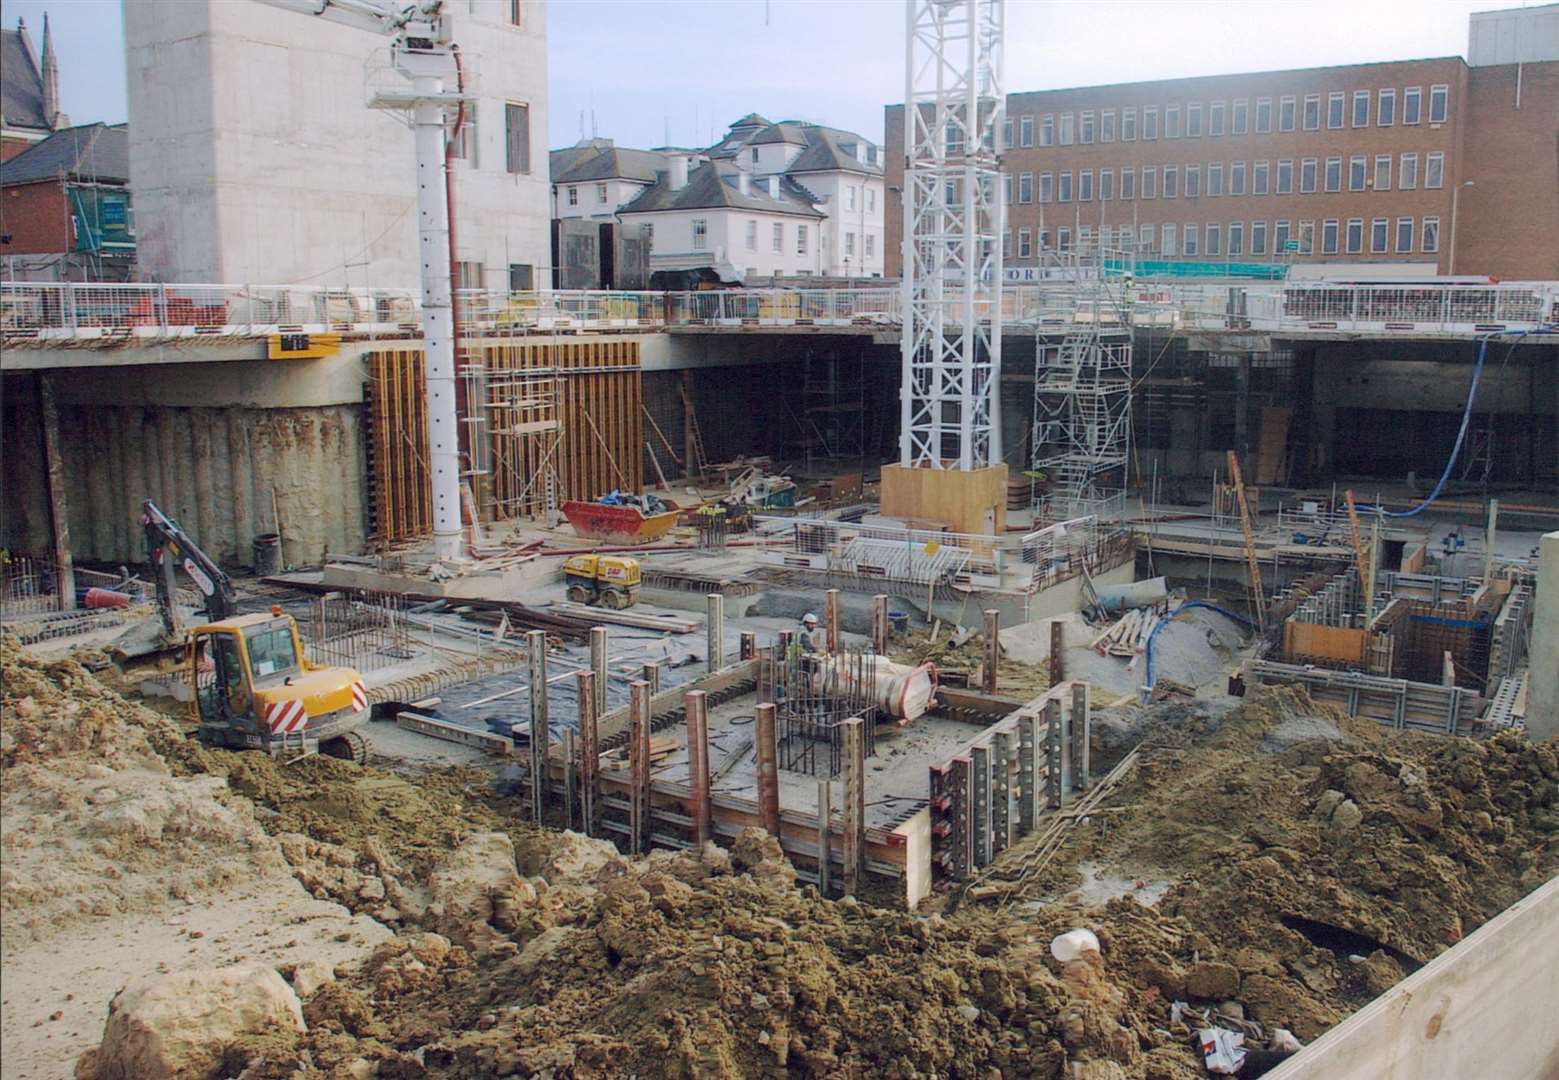 Work on the County Square extension in 2006. Trafalgar House in Bank Street can be seen in the background. Picture: Steve Salter